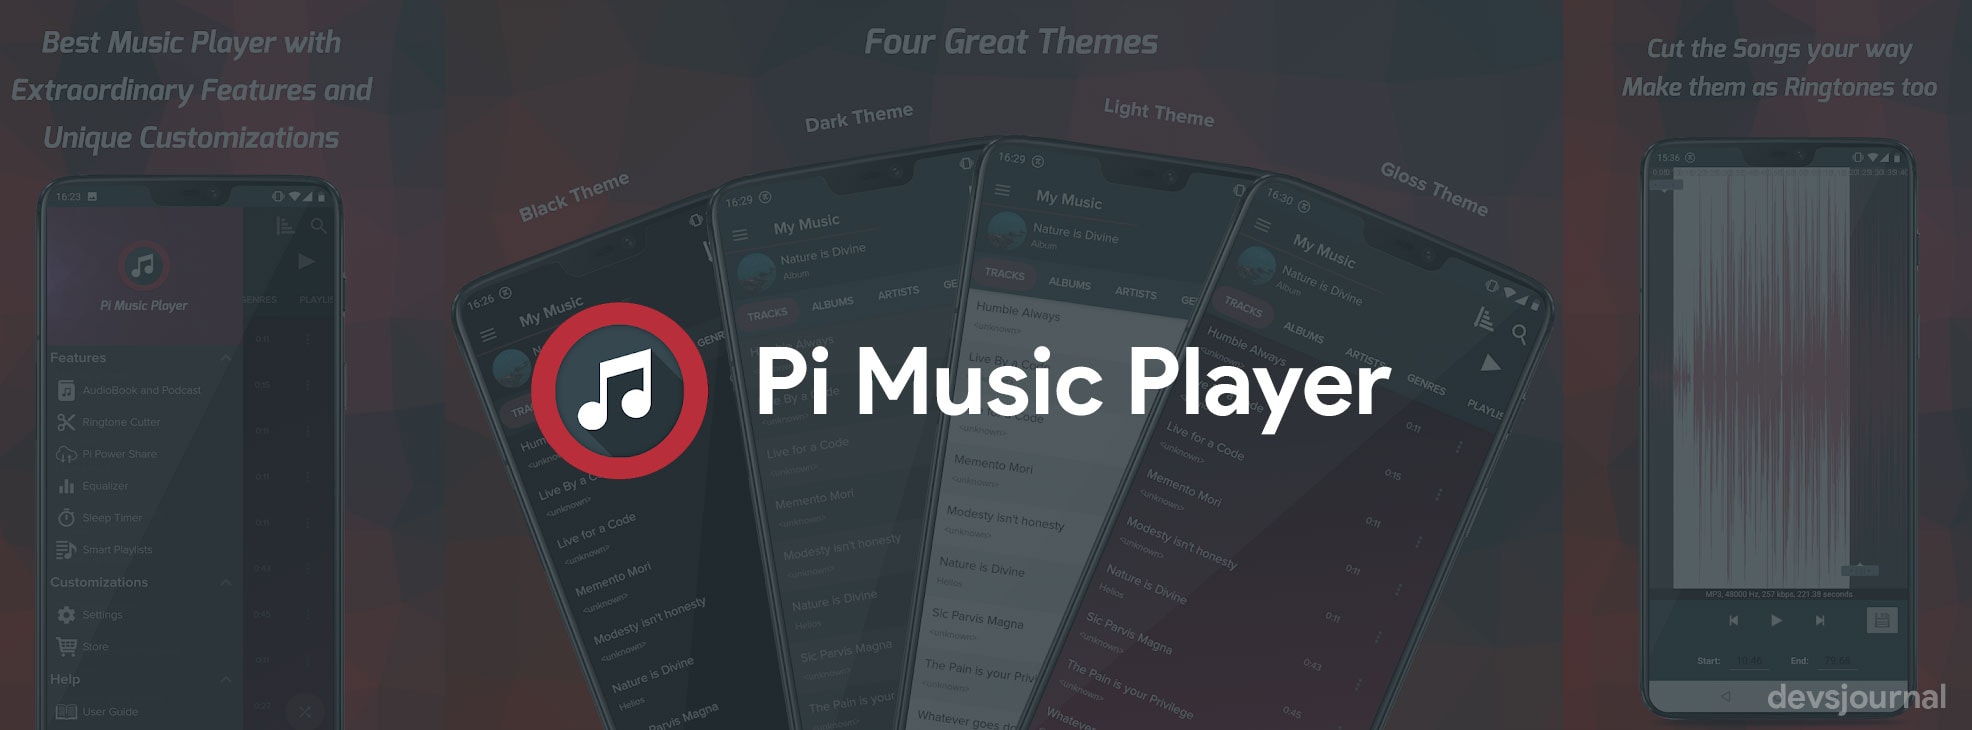 Pi Music Player Best Android Music Player with Audiobook and Podcast